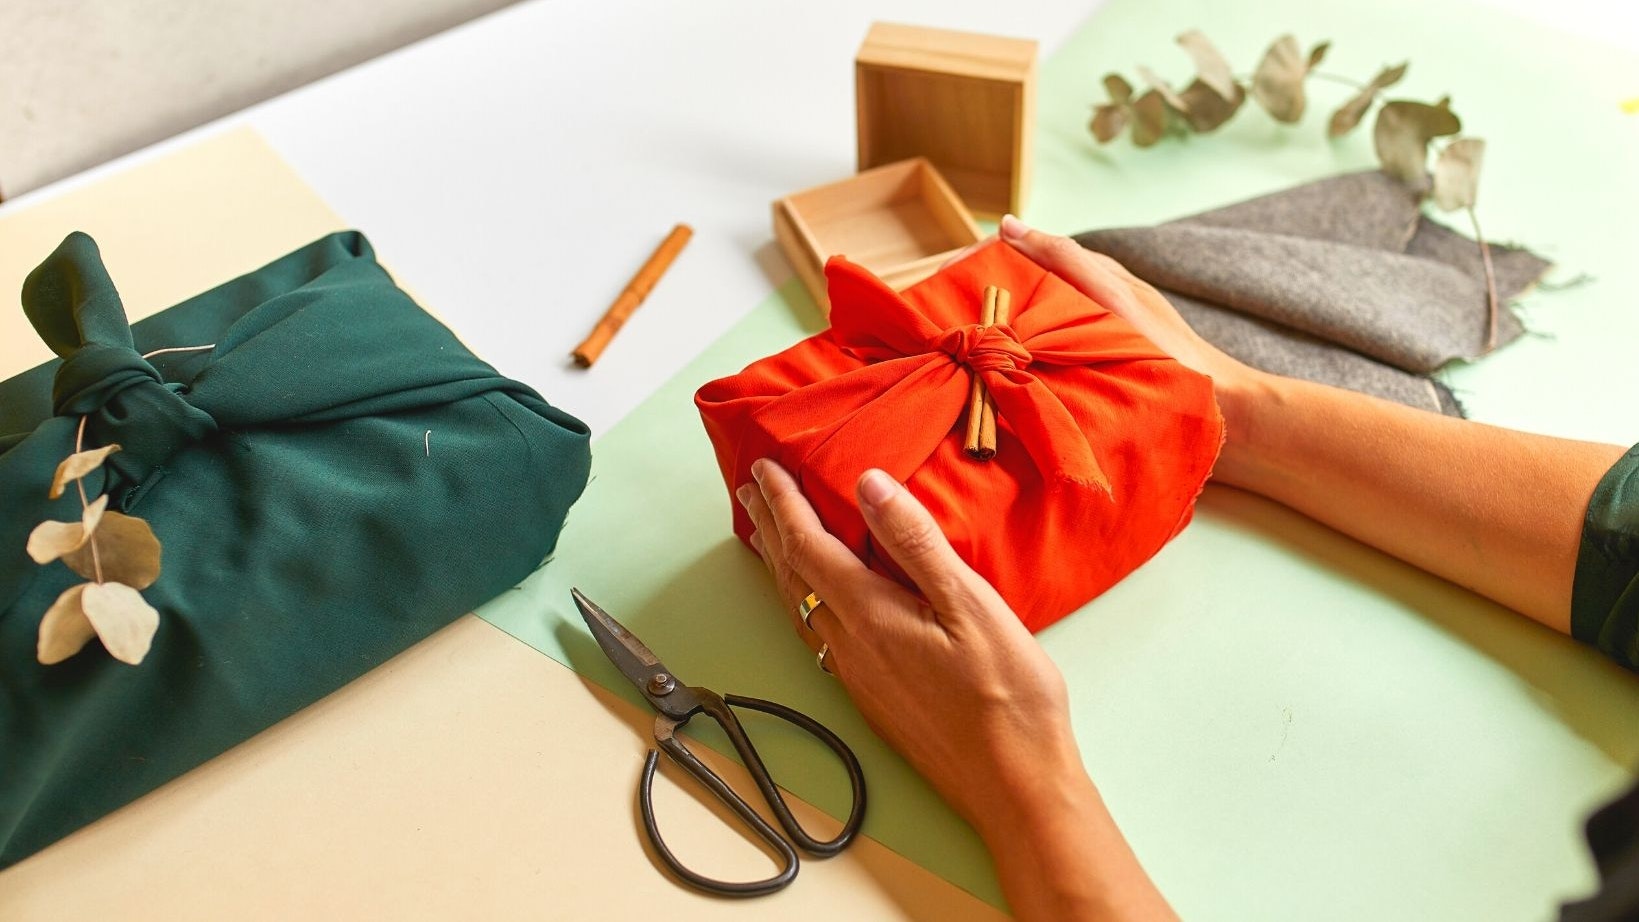 5 Tips To Help Break That Wrapping Paper Habit